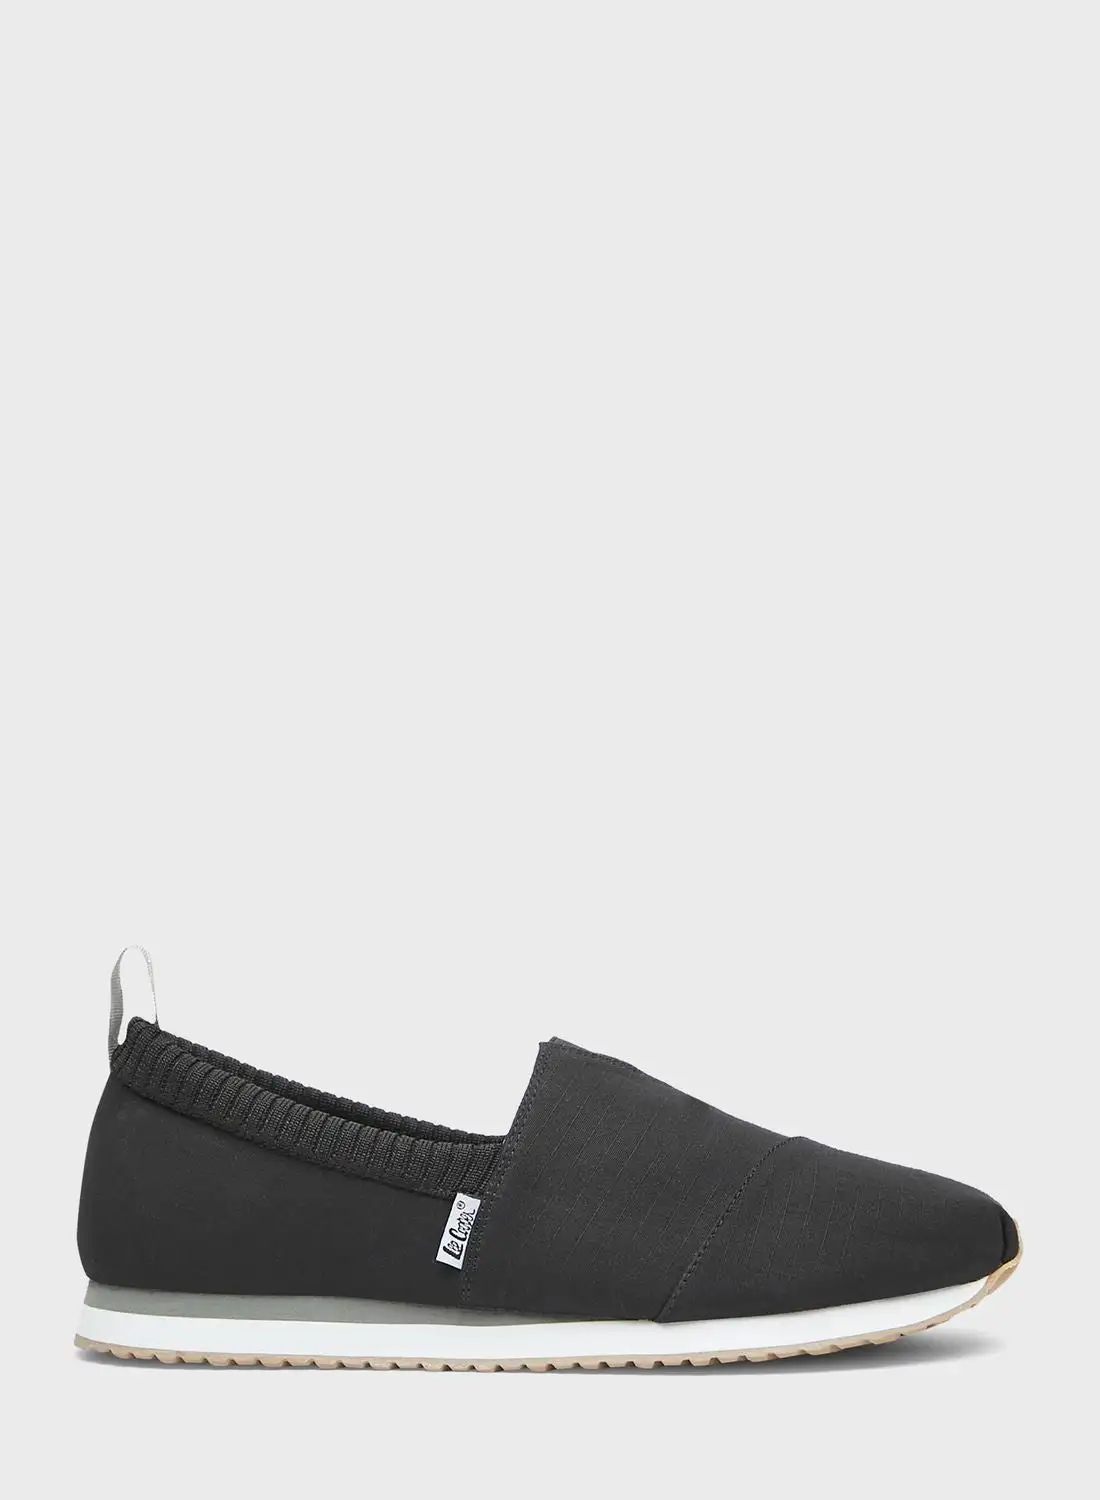 Lee Cooper Casual Slip On Shoes